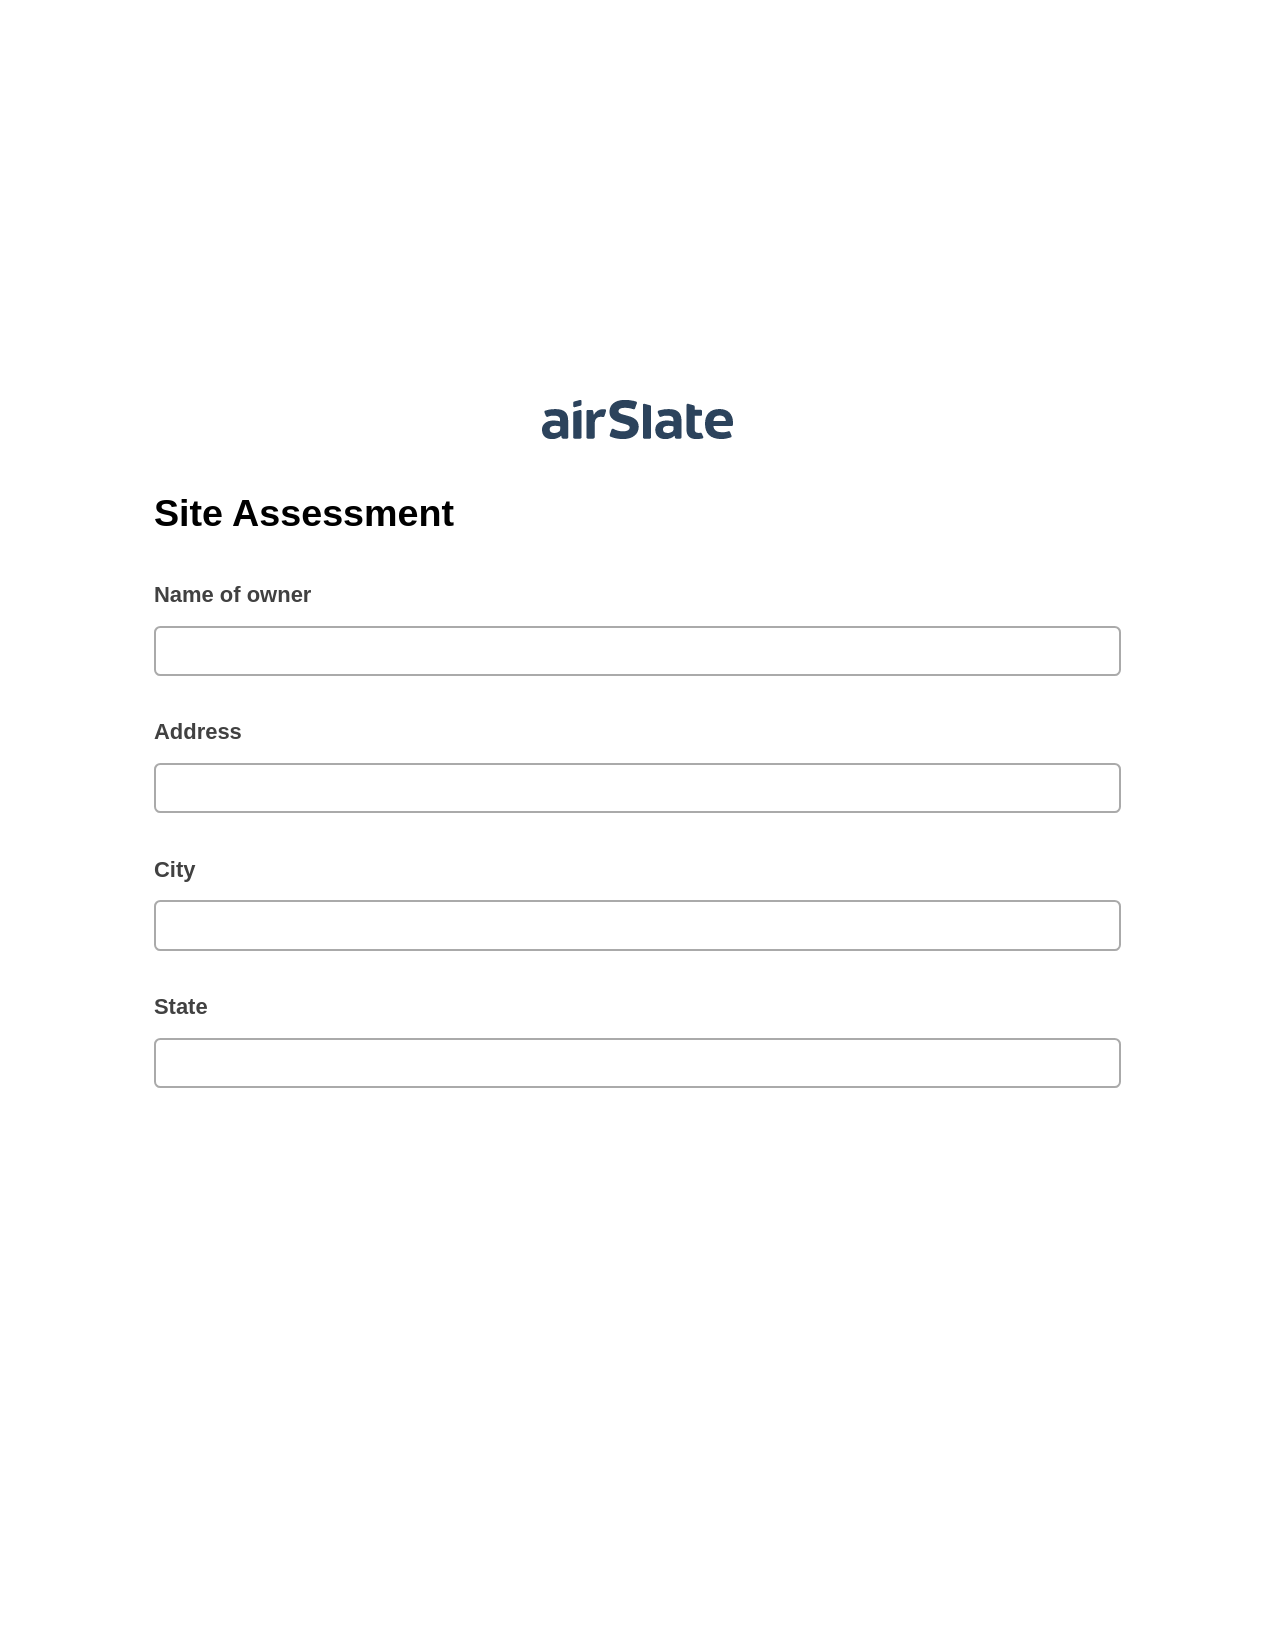 Site Assessment Pre-fill from CSV File Dropdown Options Bot, Document Hide Bot, Email Notification Postfinish Bot